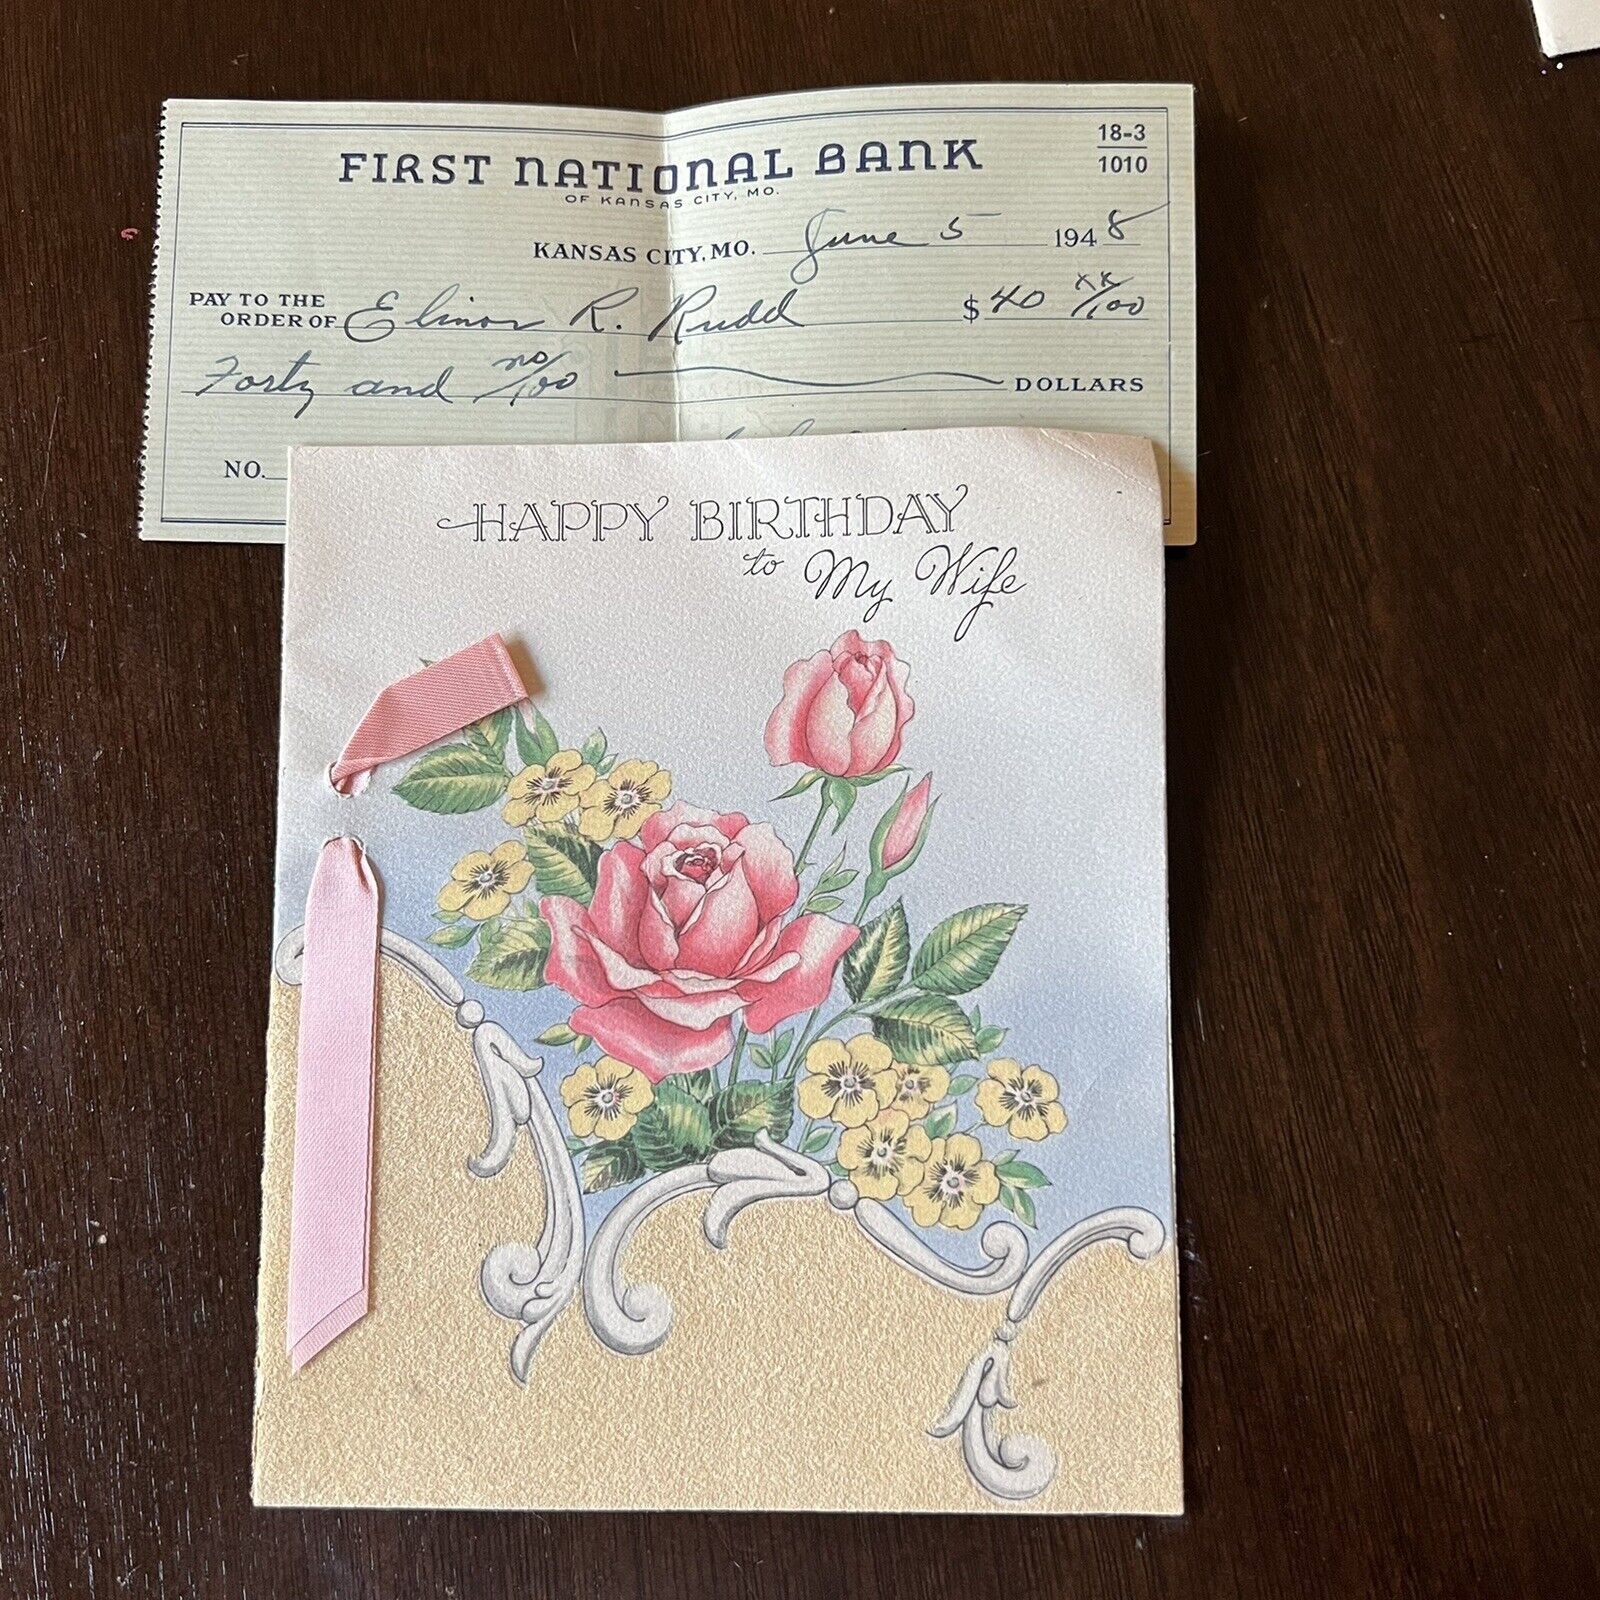 1948 HAPPY BIRTHDAY TO WIFE GREETINGS CARD WITH CHECK BUZZA CARDOZO HOLLYWOOD